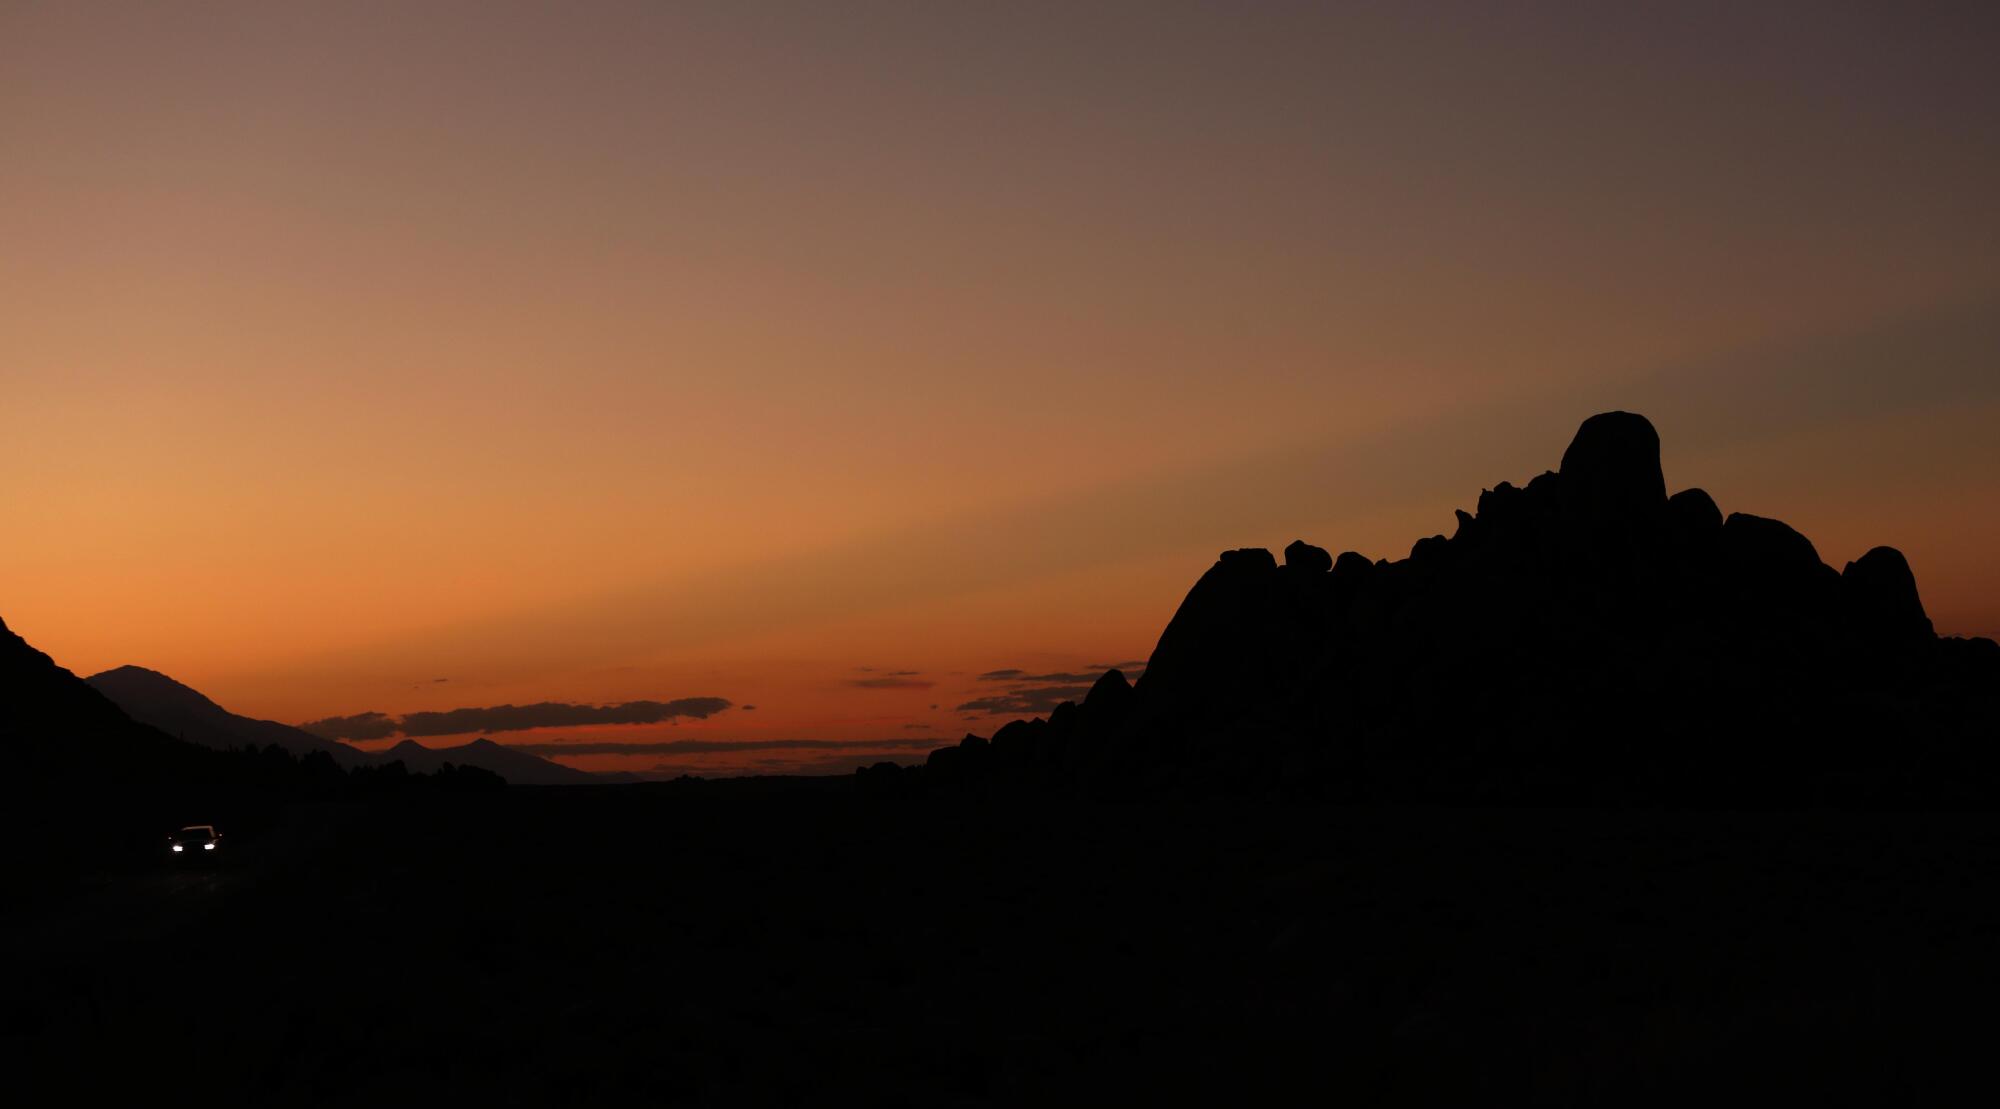 Rock formations are silhouetted against the sunset as a lone car makes its way down a road in the Alabama Hills